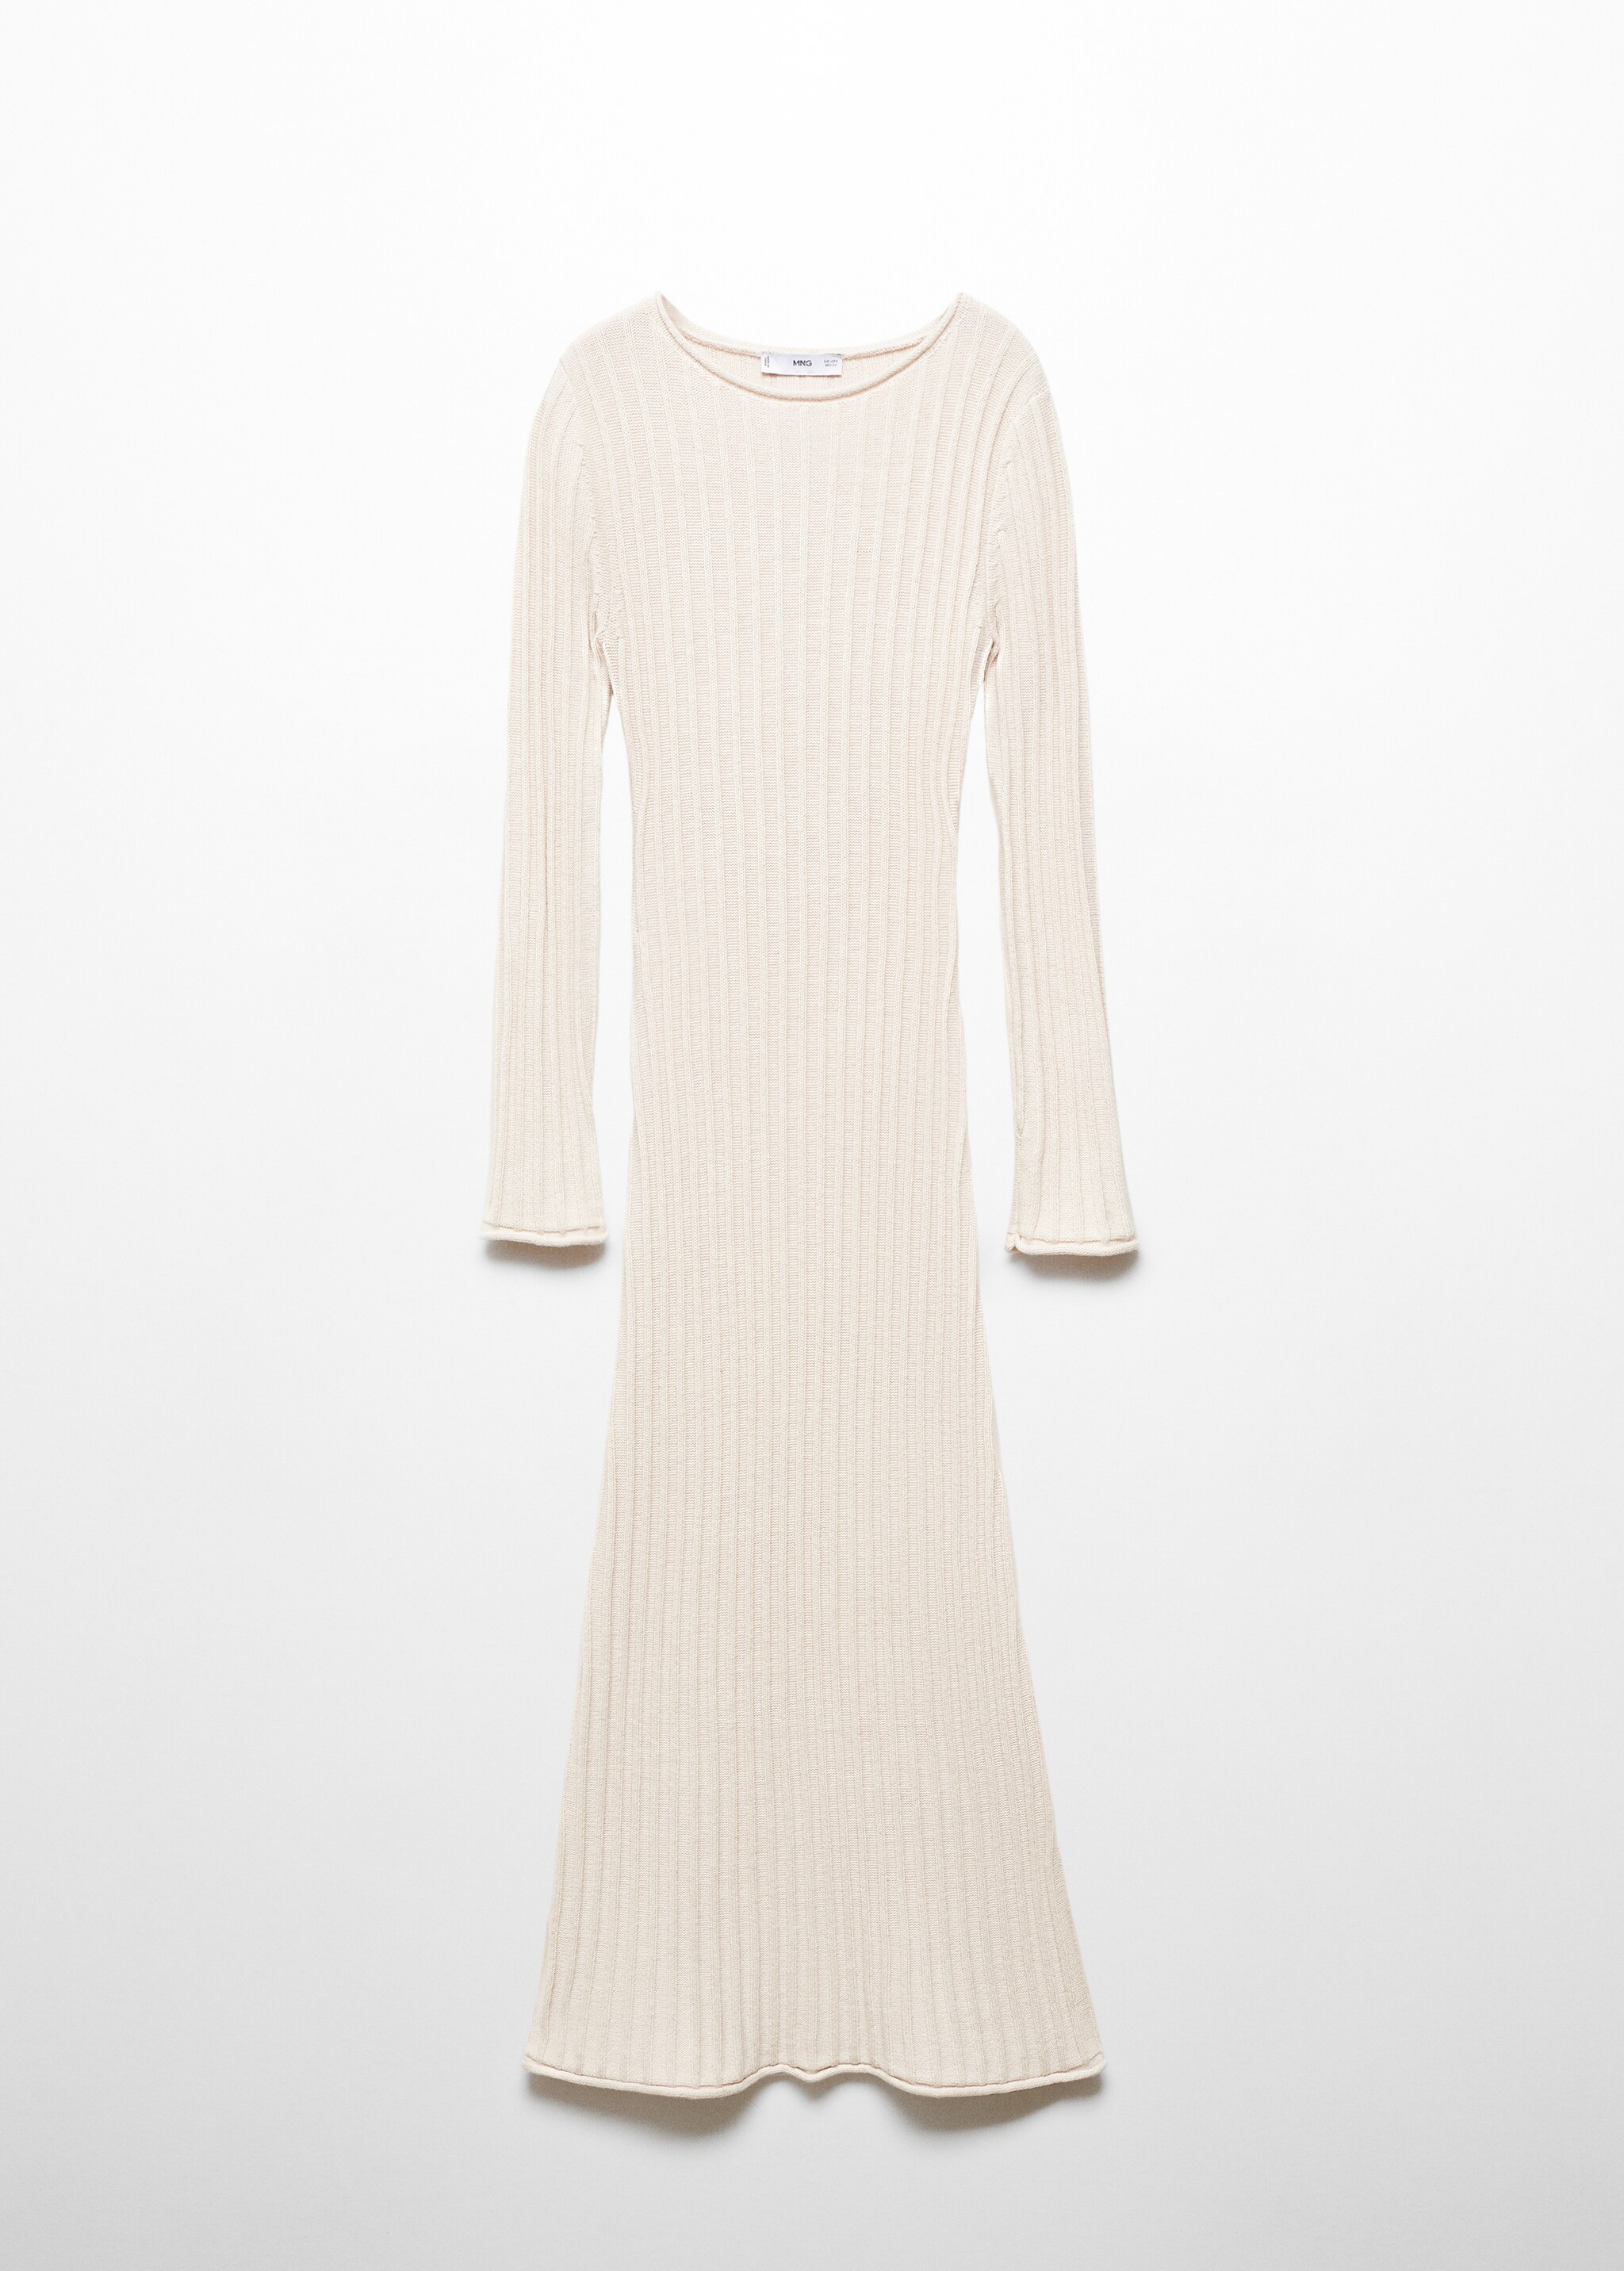 Ribbed knit dress - Article without model